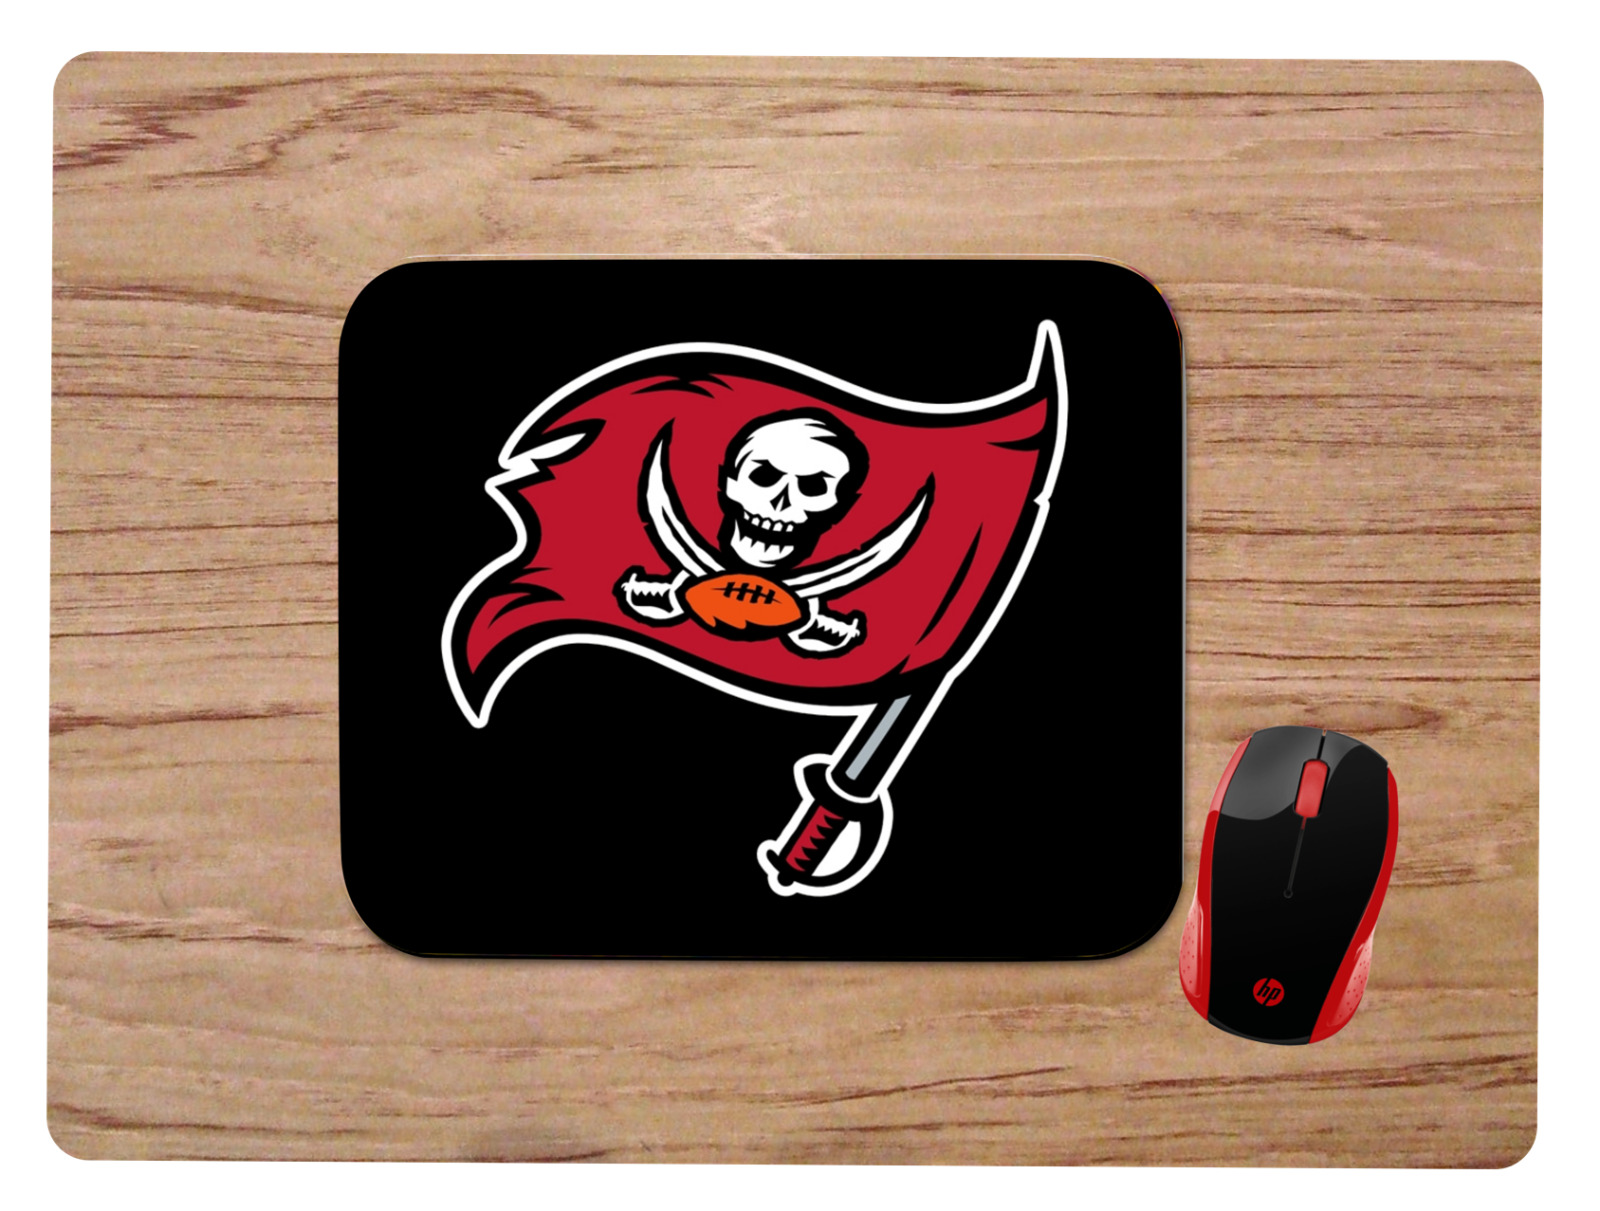 TAMPA BAY BUCCANEERS DESIGN MOUSEPAD MOUSE PAD HOME OFFICE GIFT NFL 